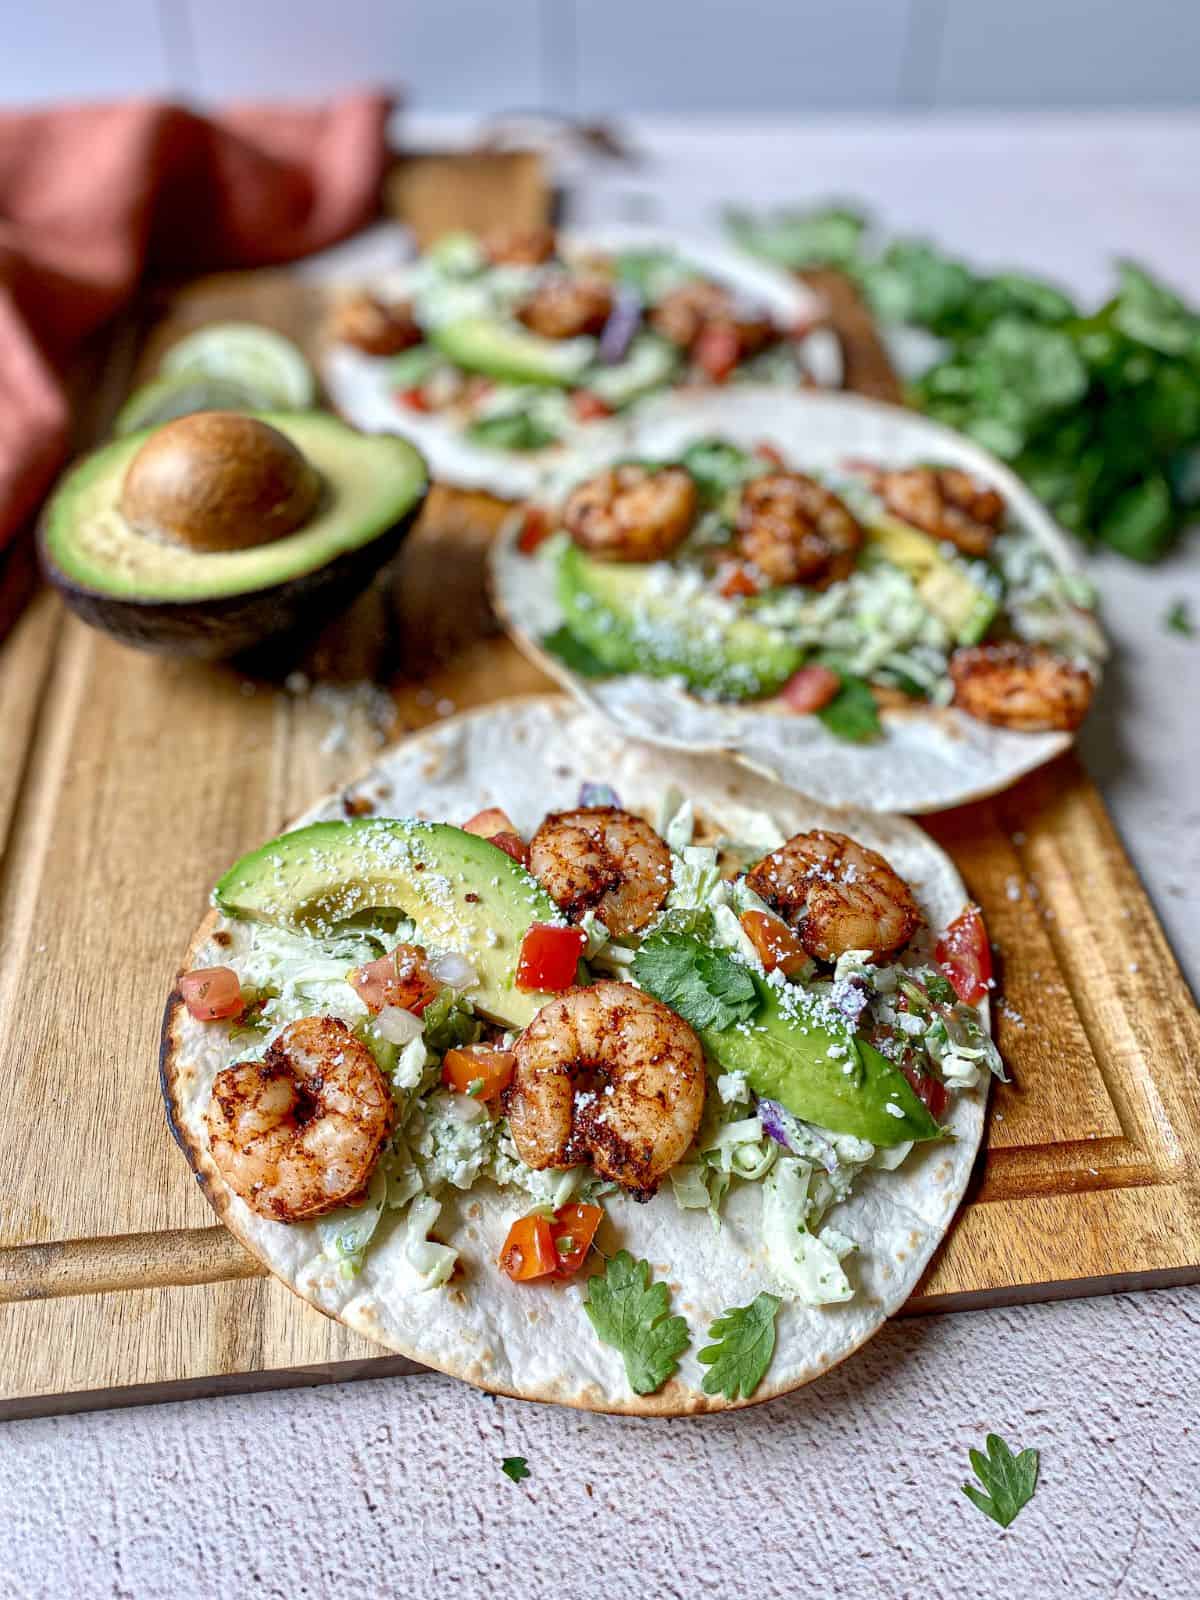 Shrimp tacos cooked in an air fryer are on a cutting board. Shrimp taco toppings are cabbage slaw, cilantro, avocado, and pico de gallo.